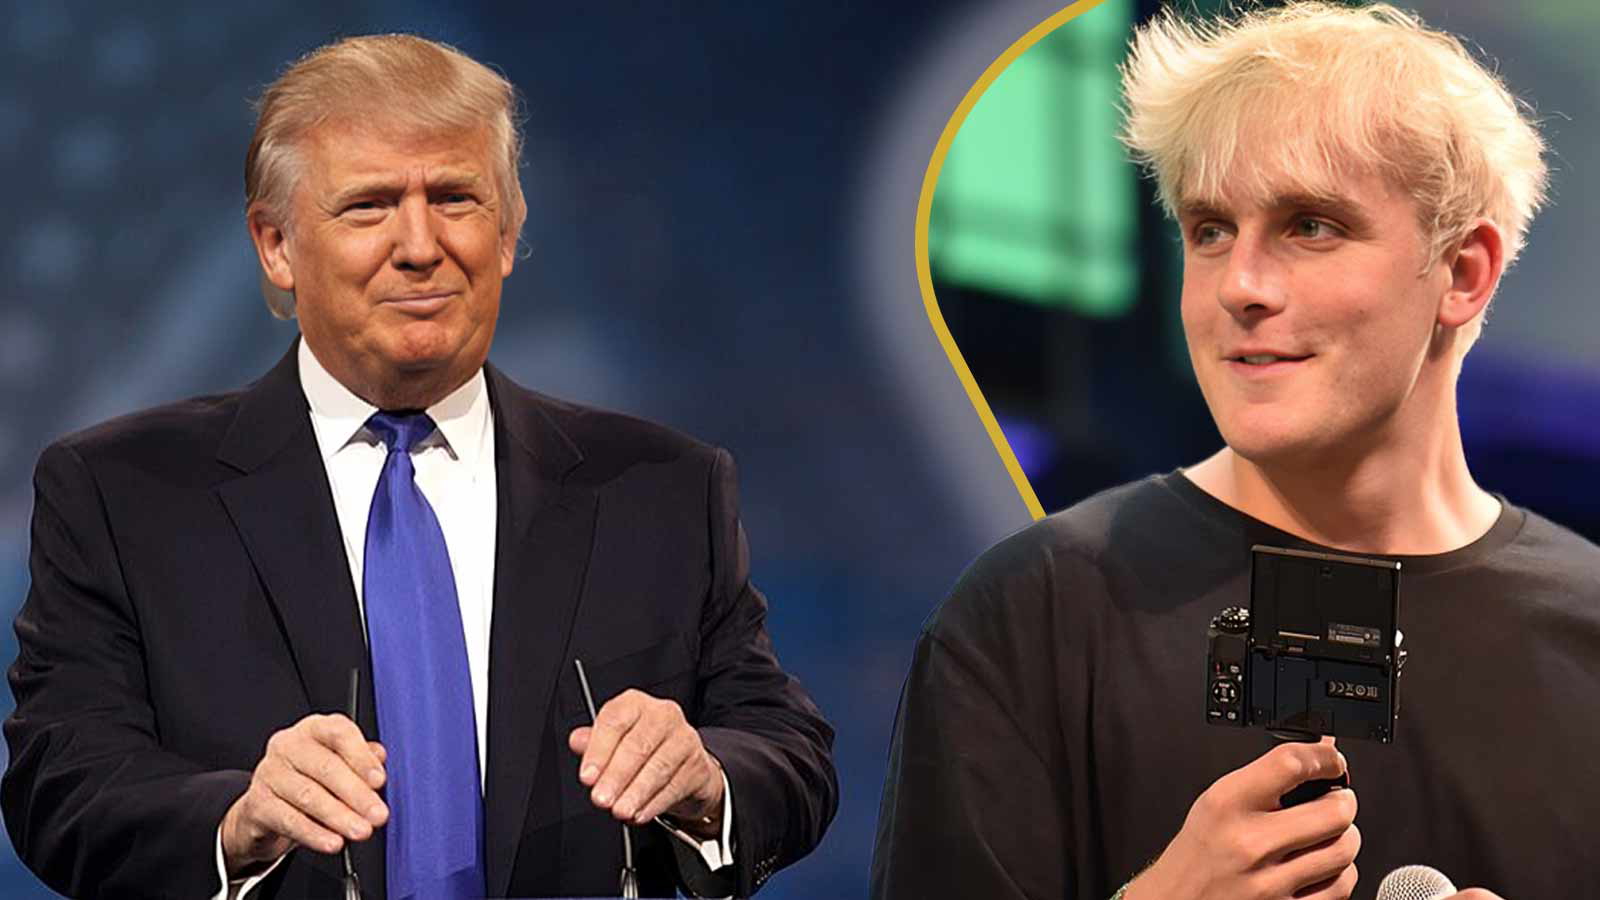 “This has so many red flags”: Jake Paul Stirs New Conspiracy Theory as Donald Trump Gets Shot During His Rally